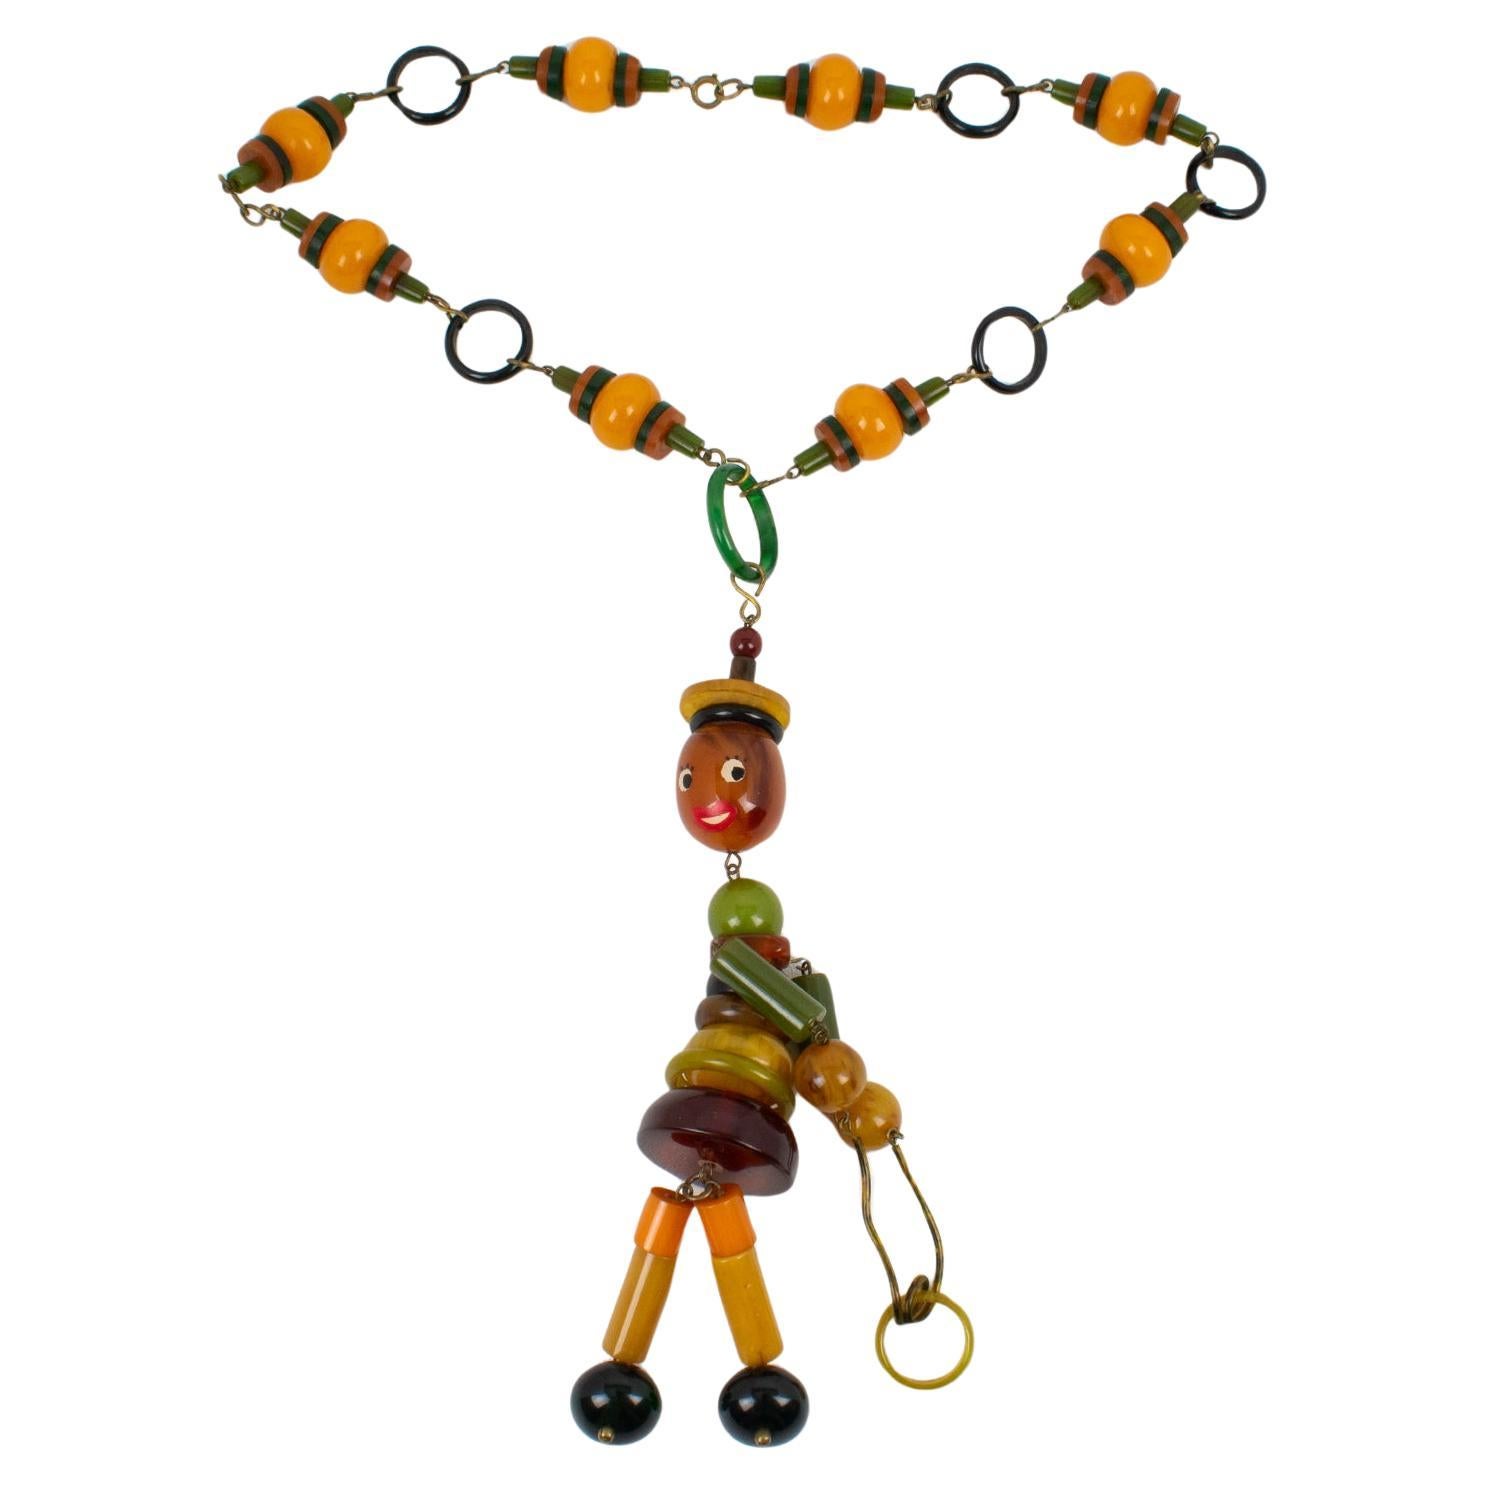 Multicolor Bakelite Long Necklace with Articulated Crib Toy Doll Pendant, 1940s For Sale